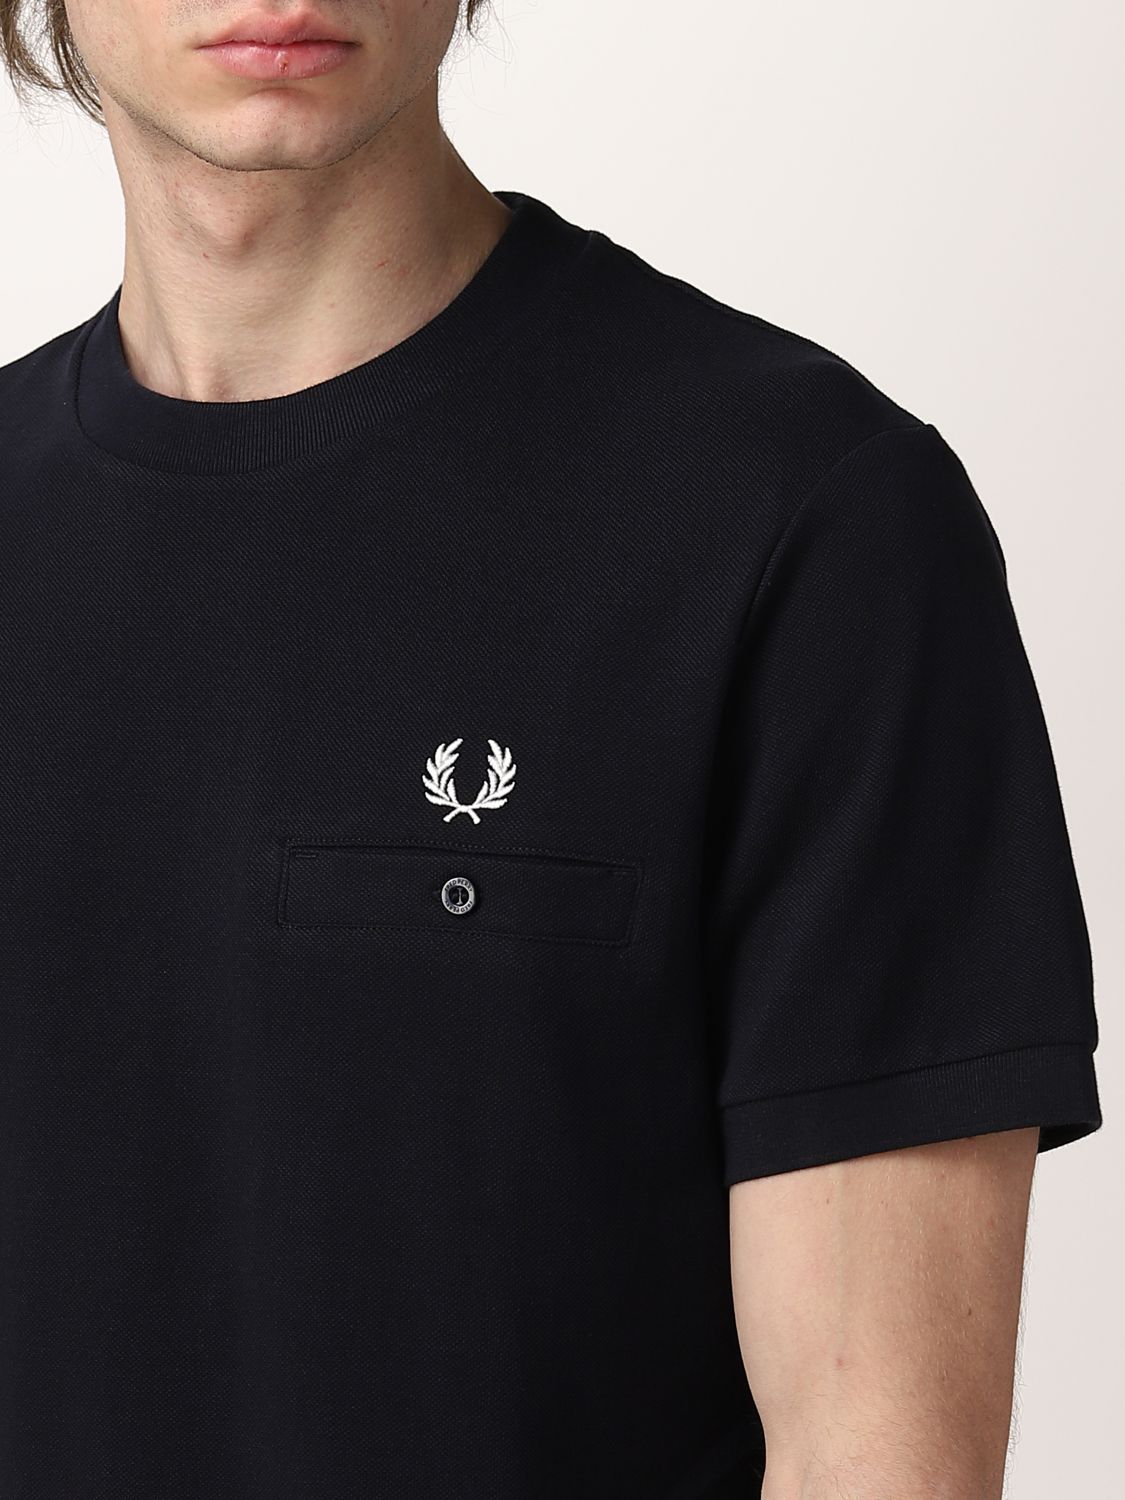 Tシャツ Fred Perry: Tシャツ メンズ Fred Perry ネイビー 3